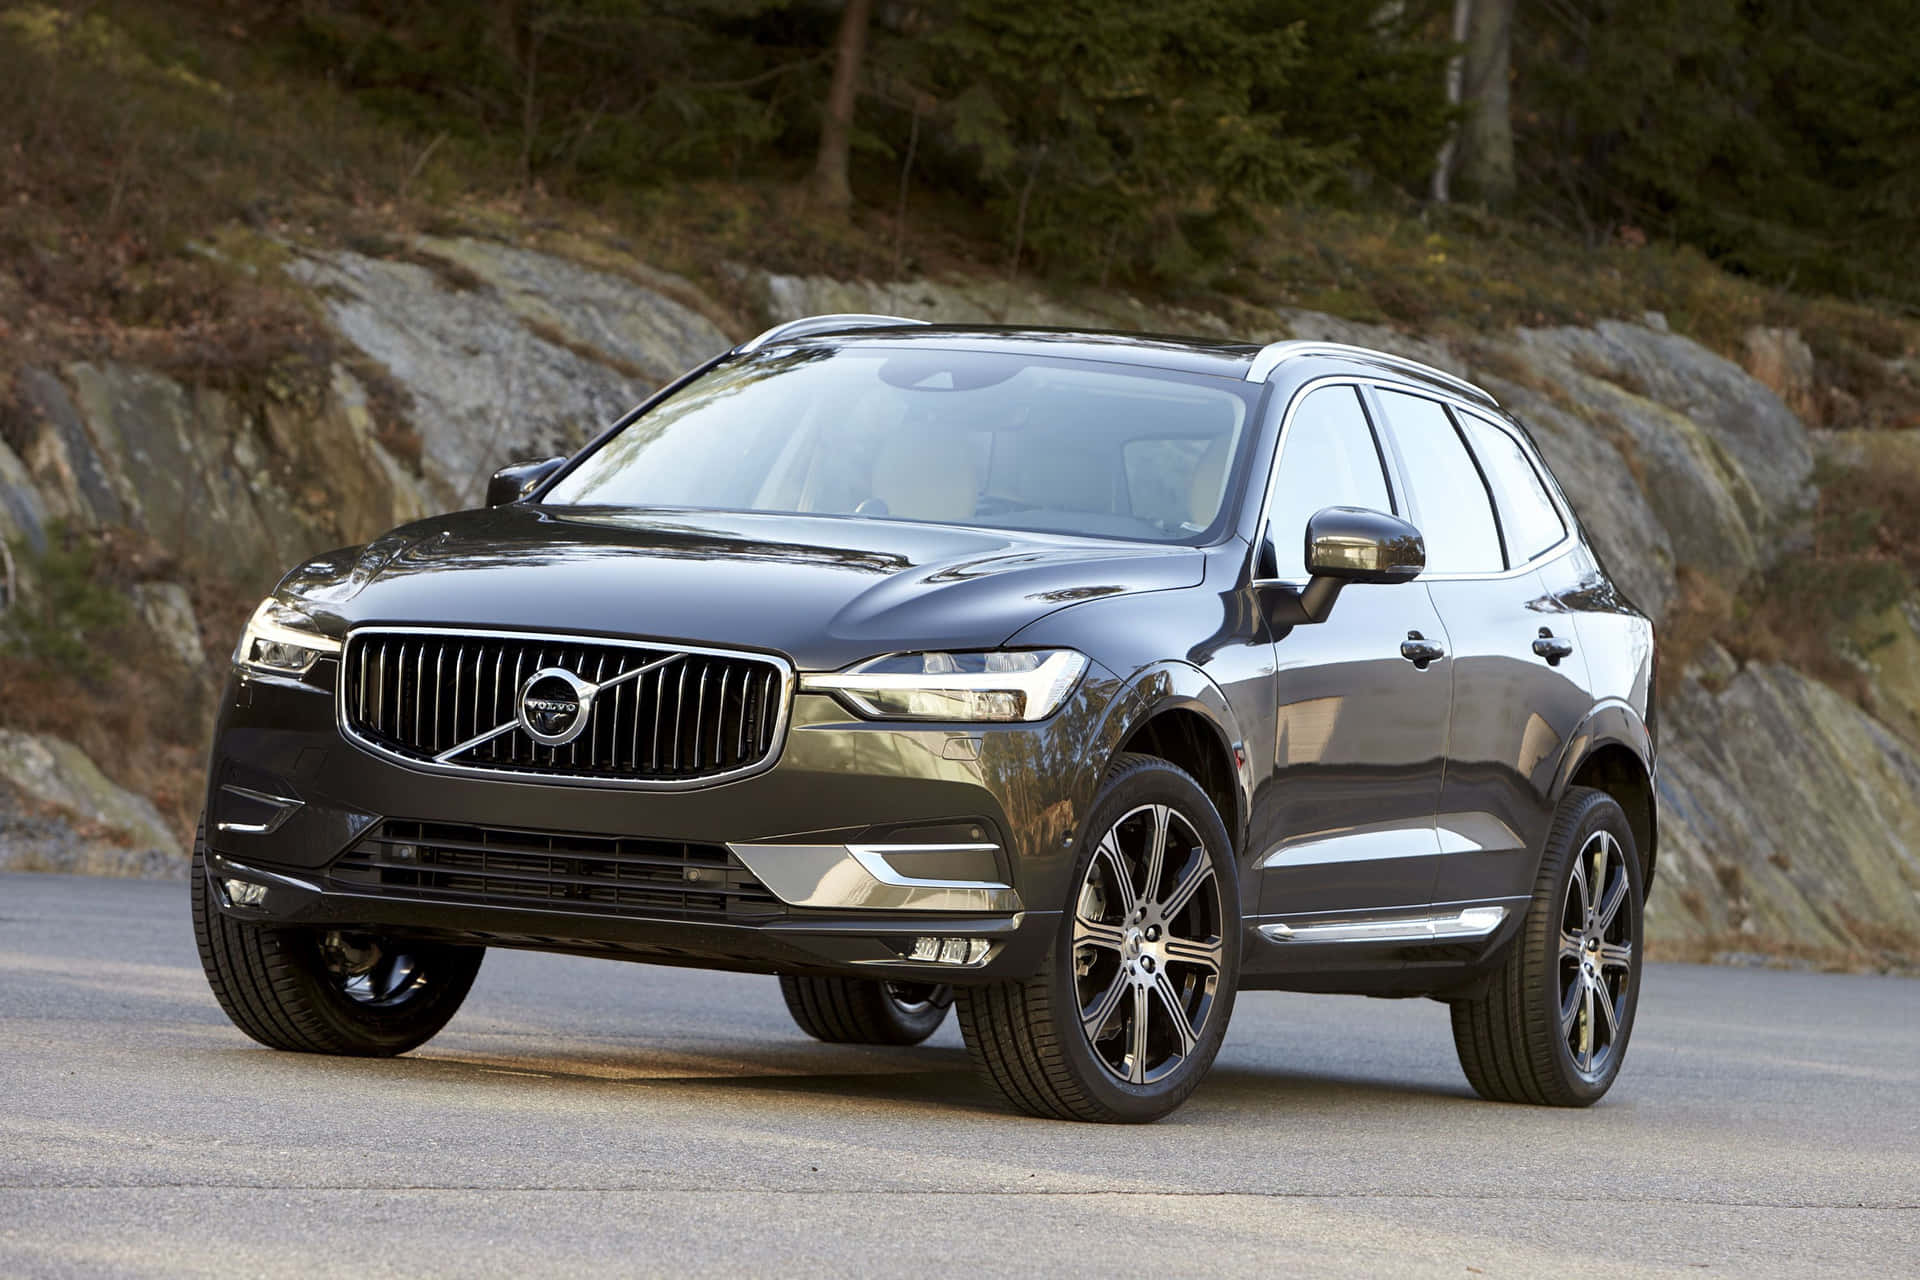 Caption: Stunning Volvo Xc60 Parked Outdoors Against A Serene Backdrop Wallpaper